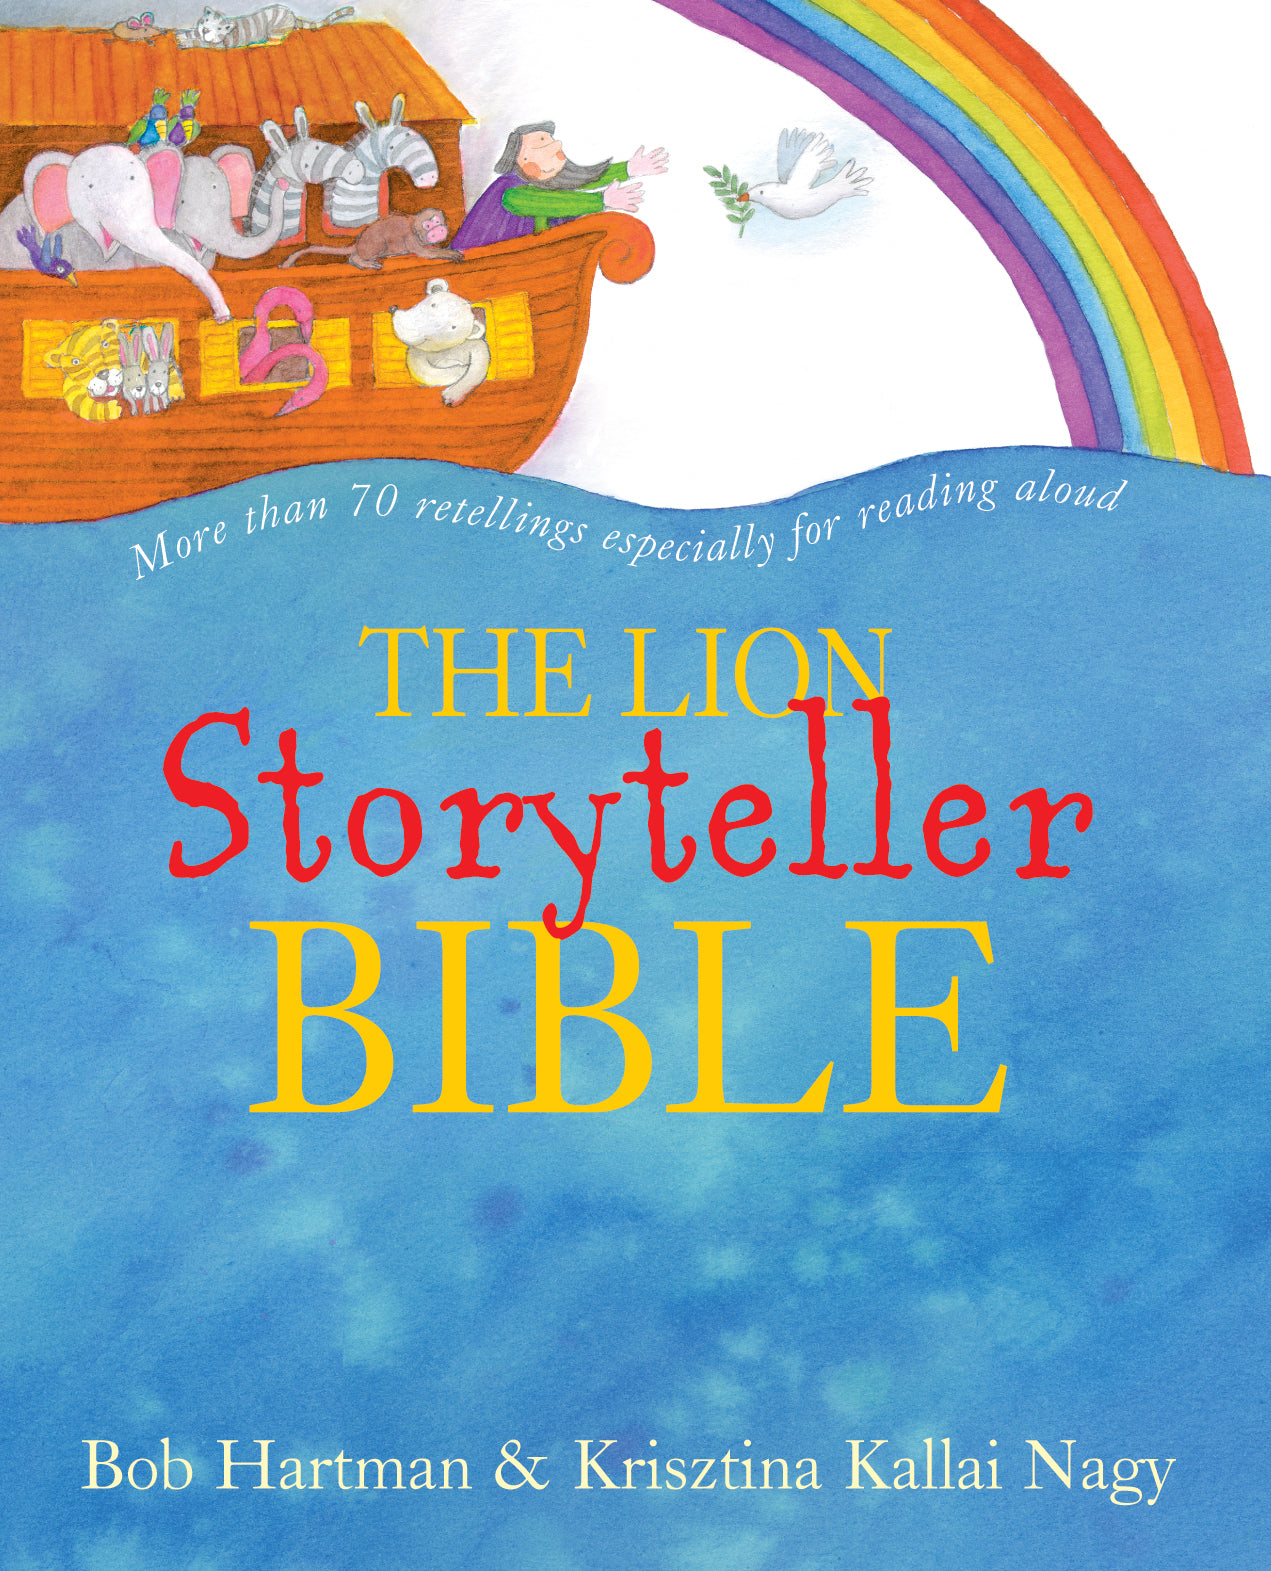 Image of The Lion Storyteller Bible other